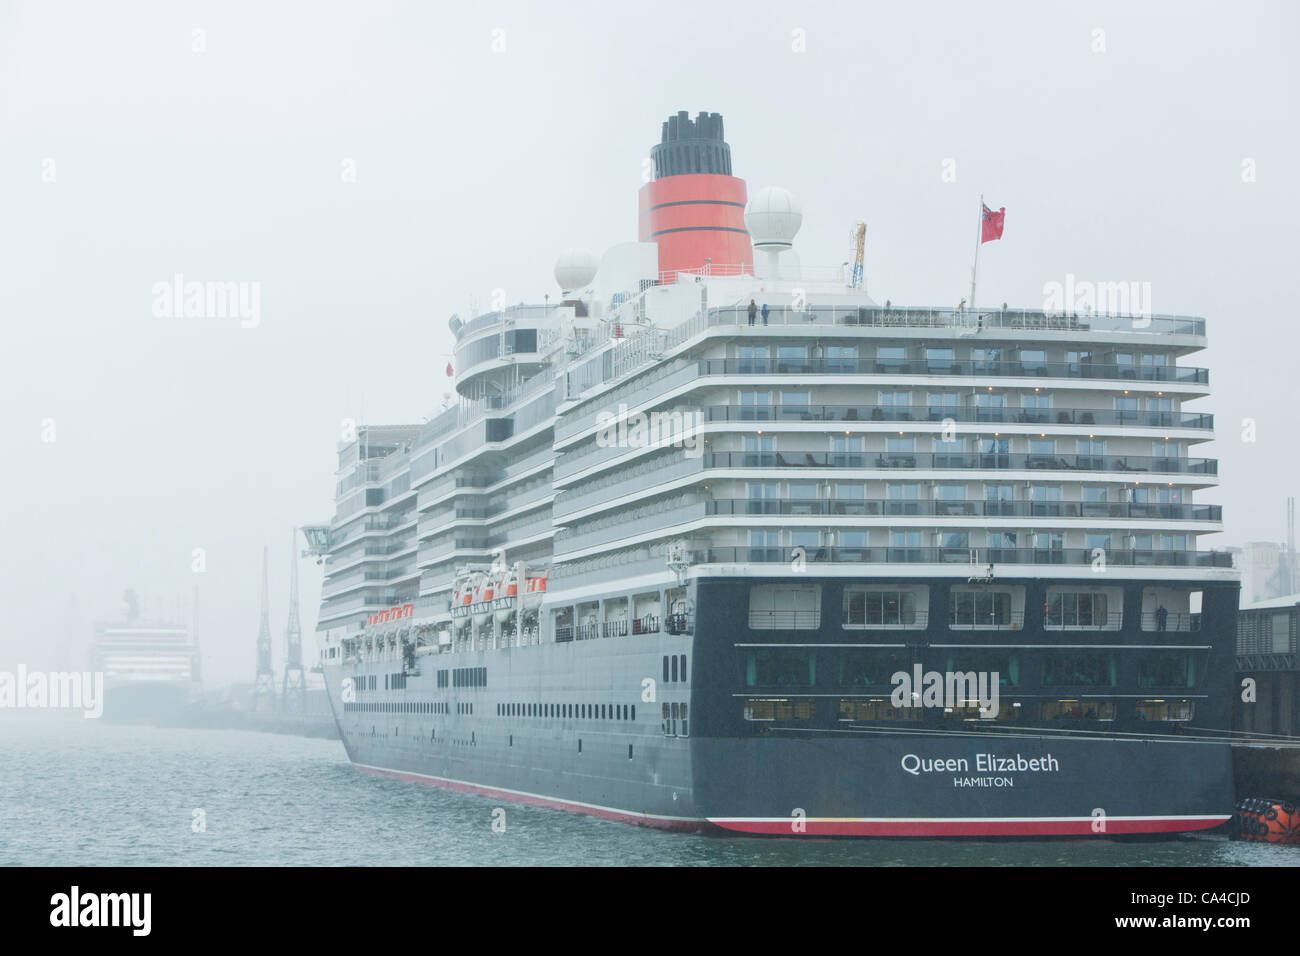 SOUTHAMPTON, UK, 5th June 2012. The Queen Elizabeth (front) and Queen Victoria are berthed in Southampton as part of the 'Three Queens' event during celebrations for Queen Elizabeth II's diamond jubilee. Credit:  Alick Cotterill / Alamy Live News Stock Photo